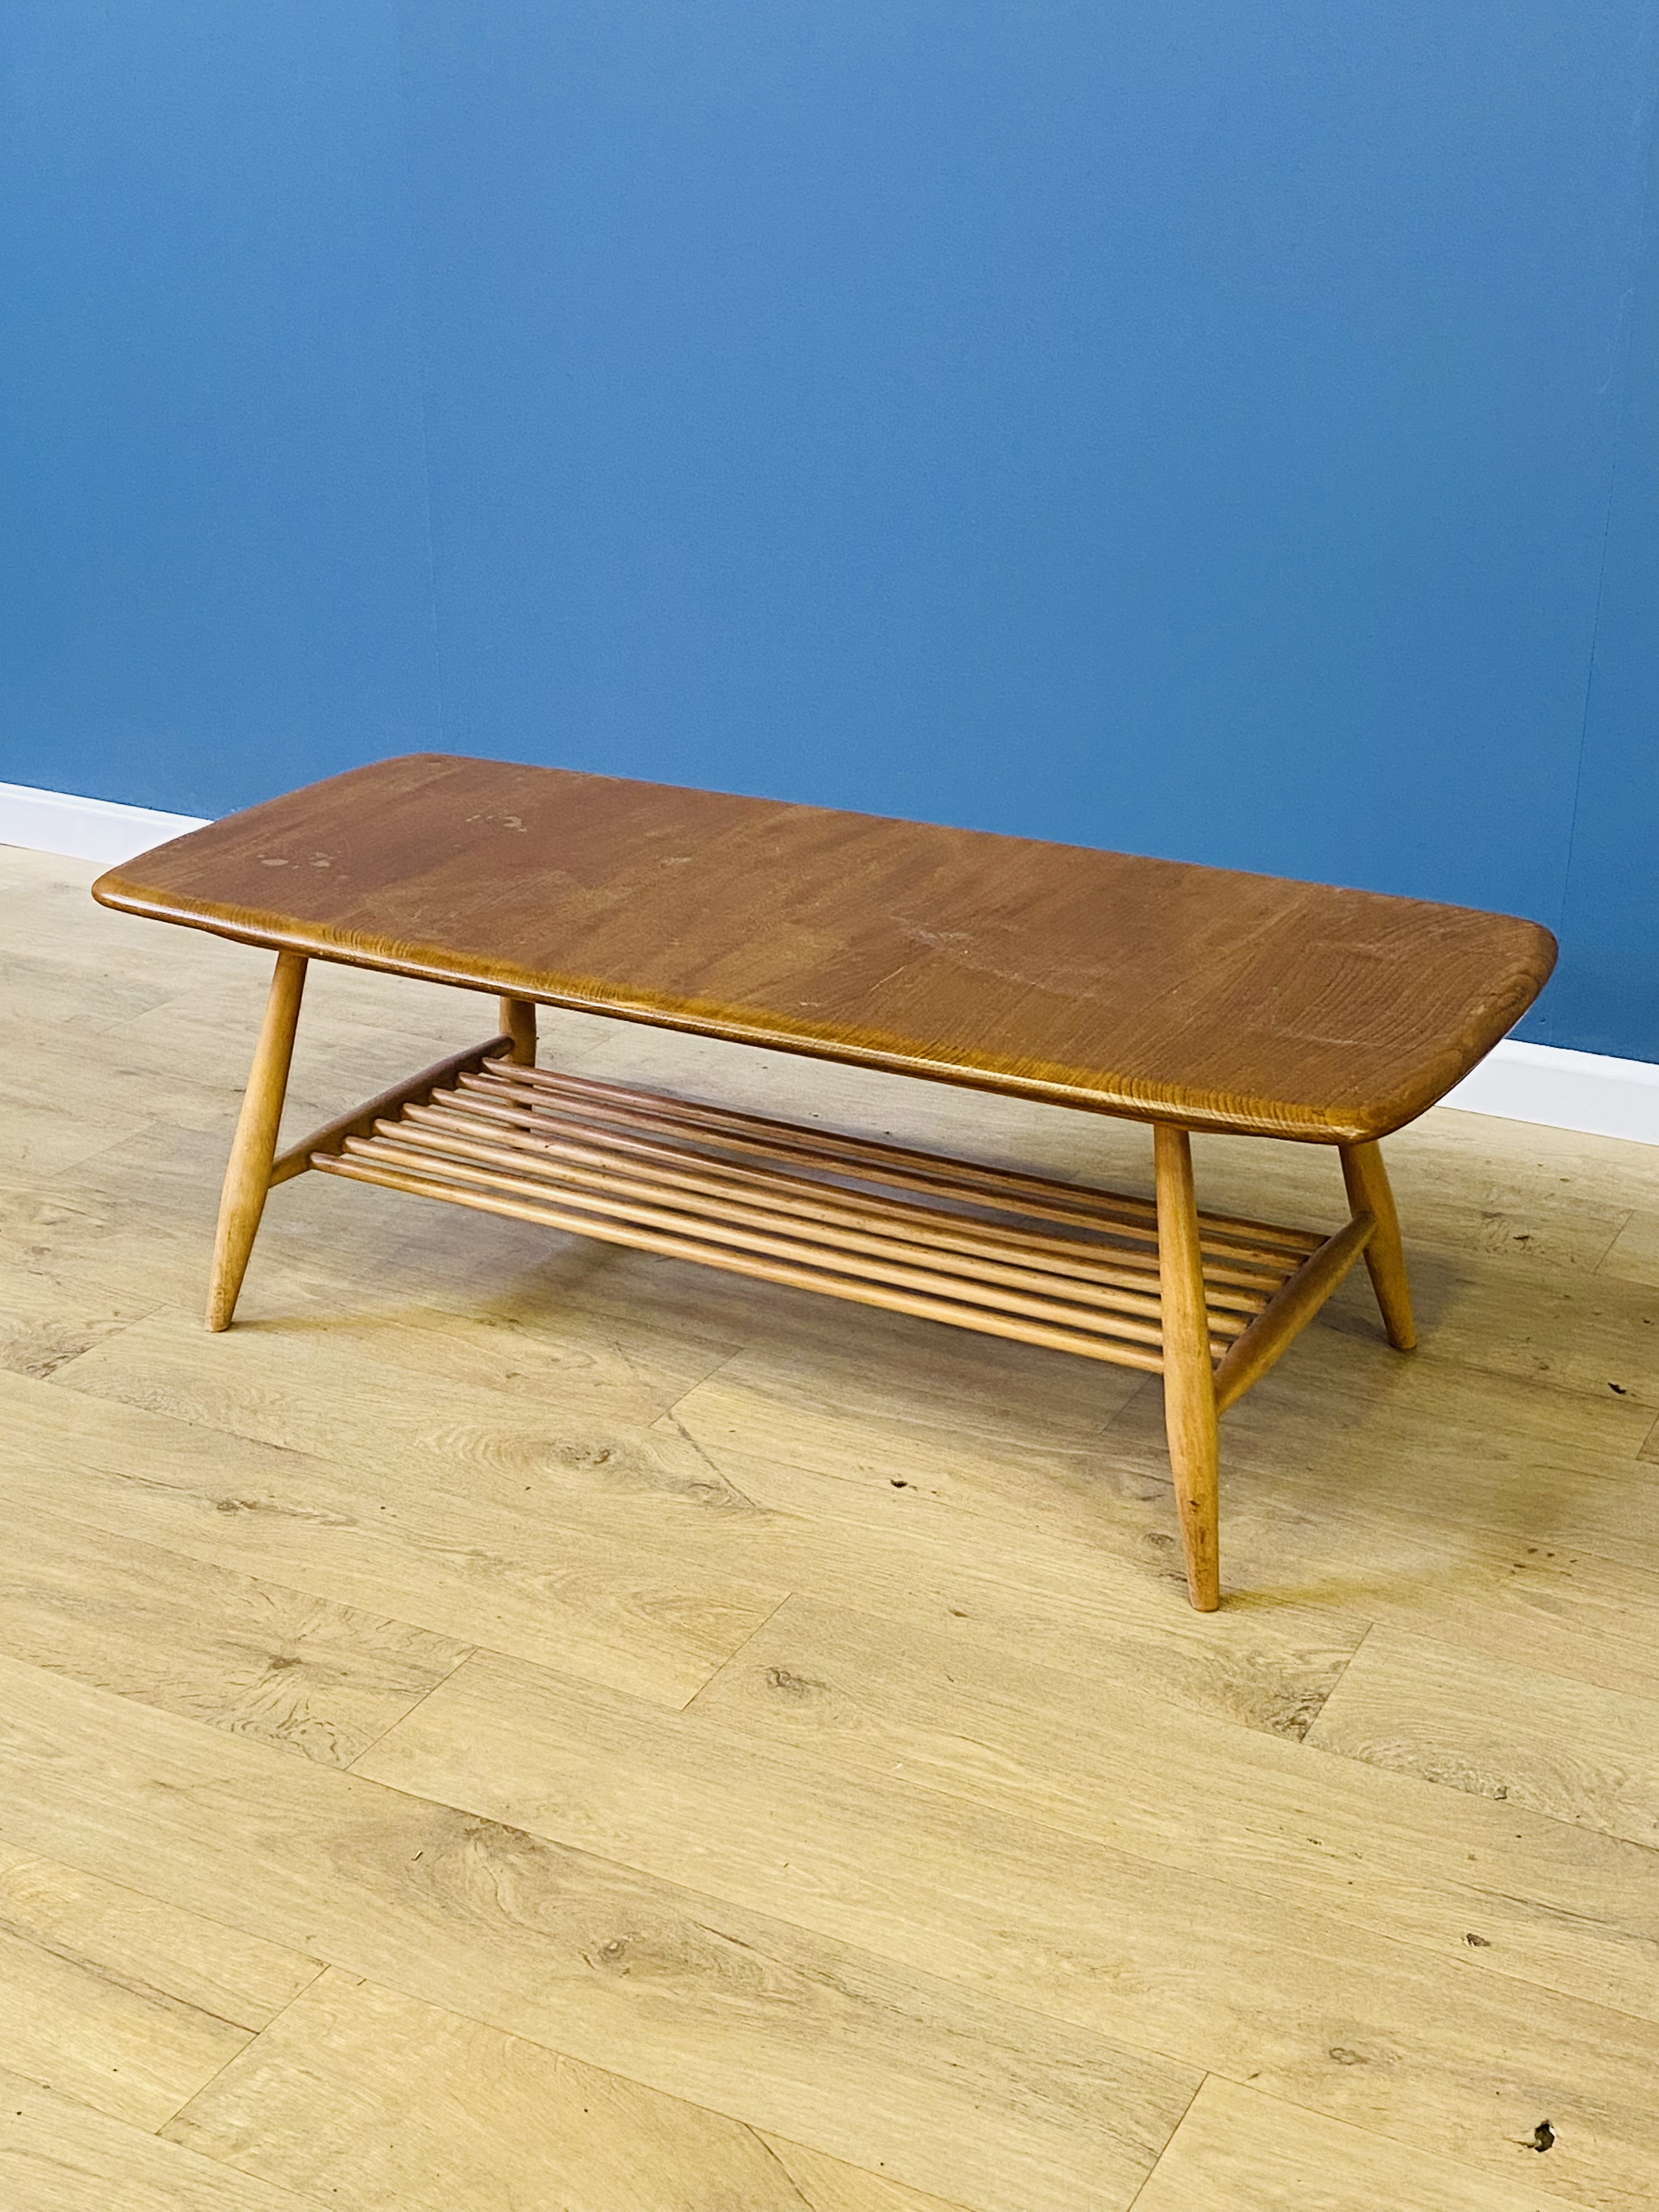 Ercol coffee table - Image 2 of 4